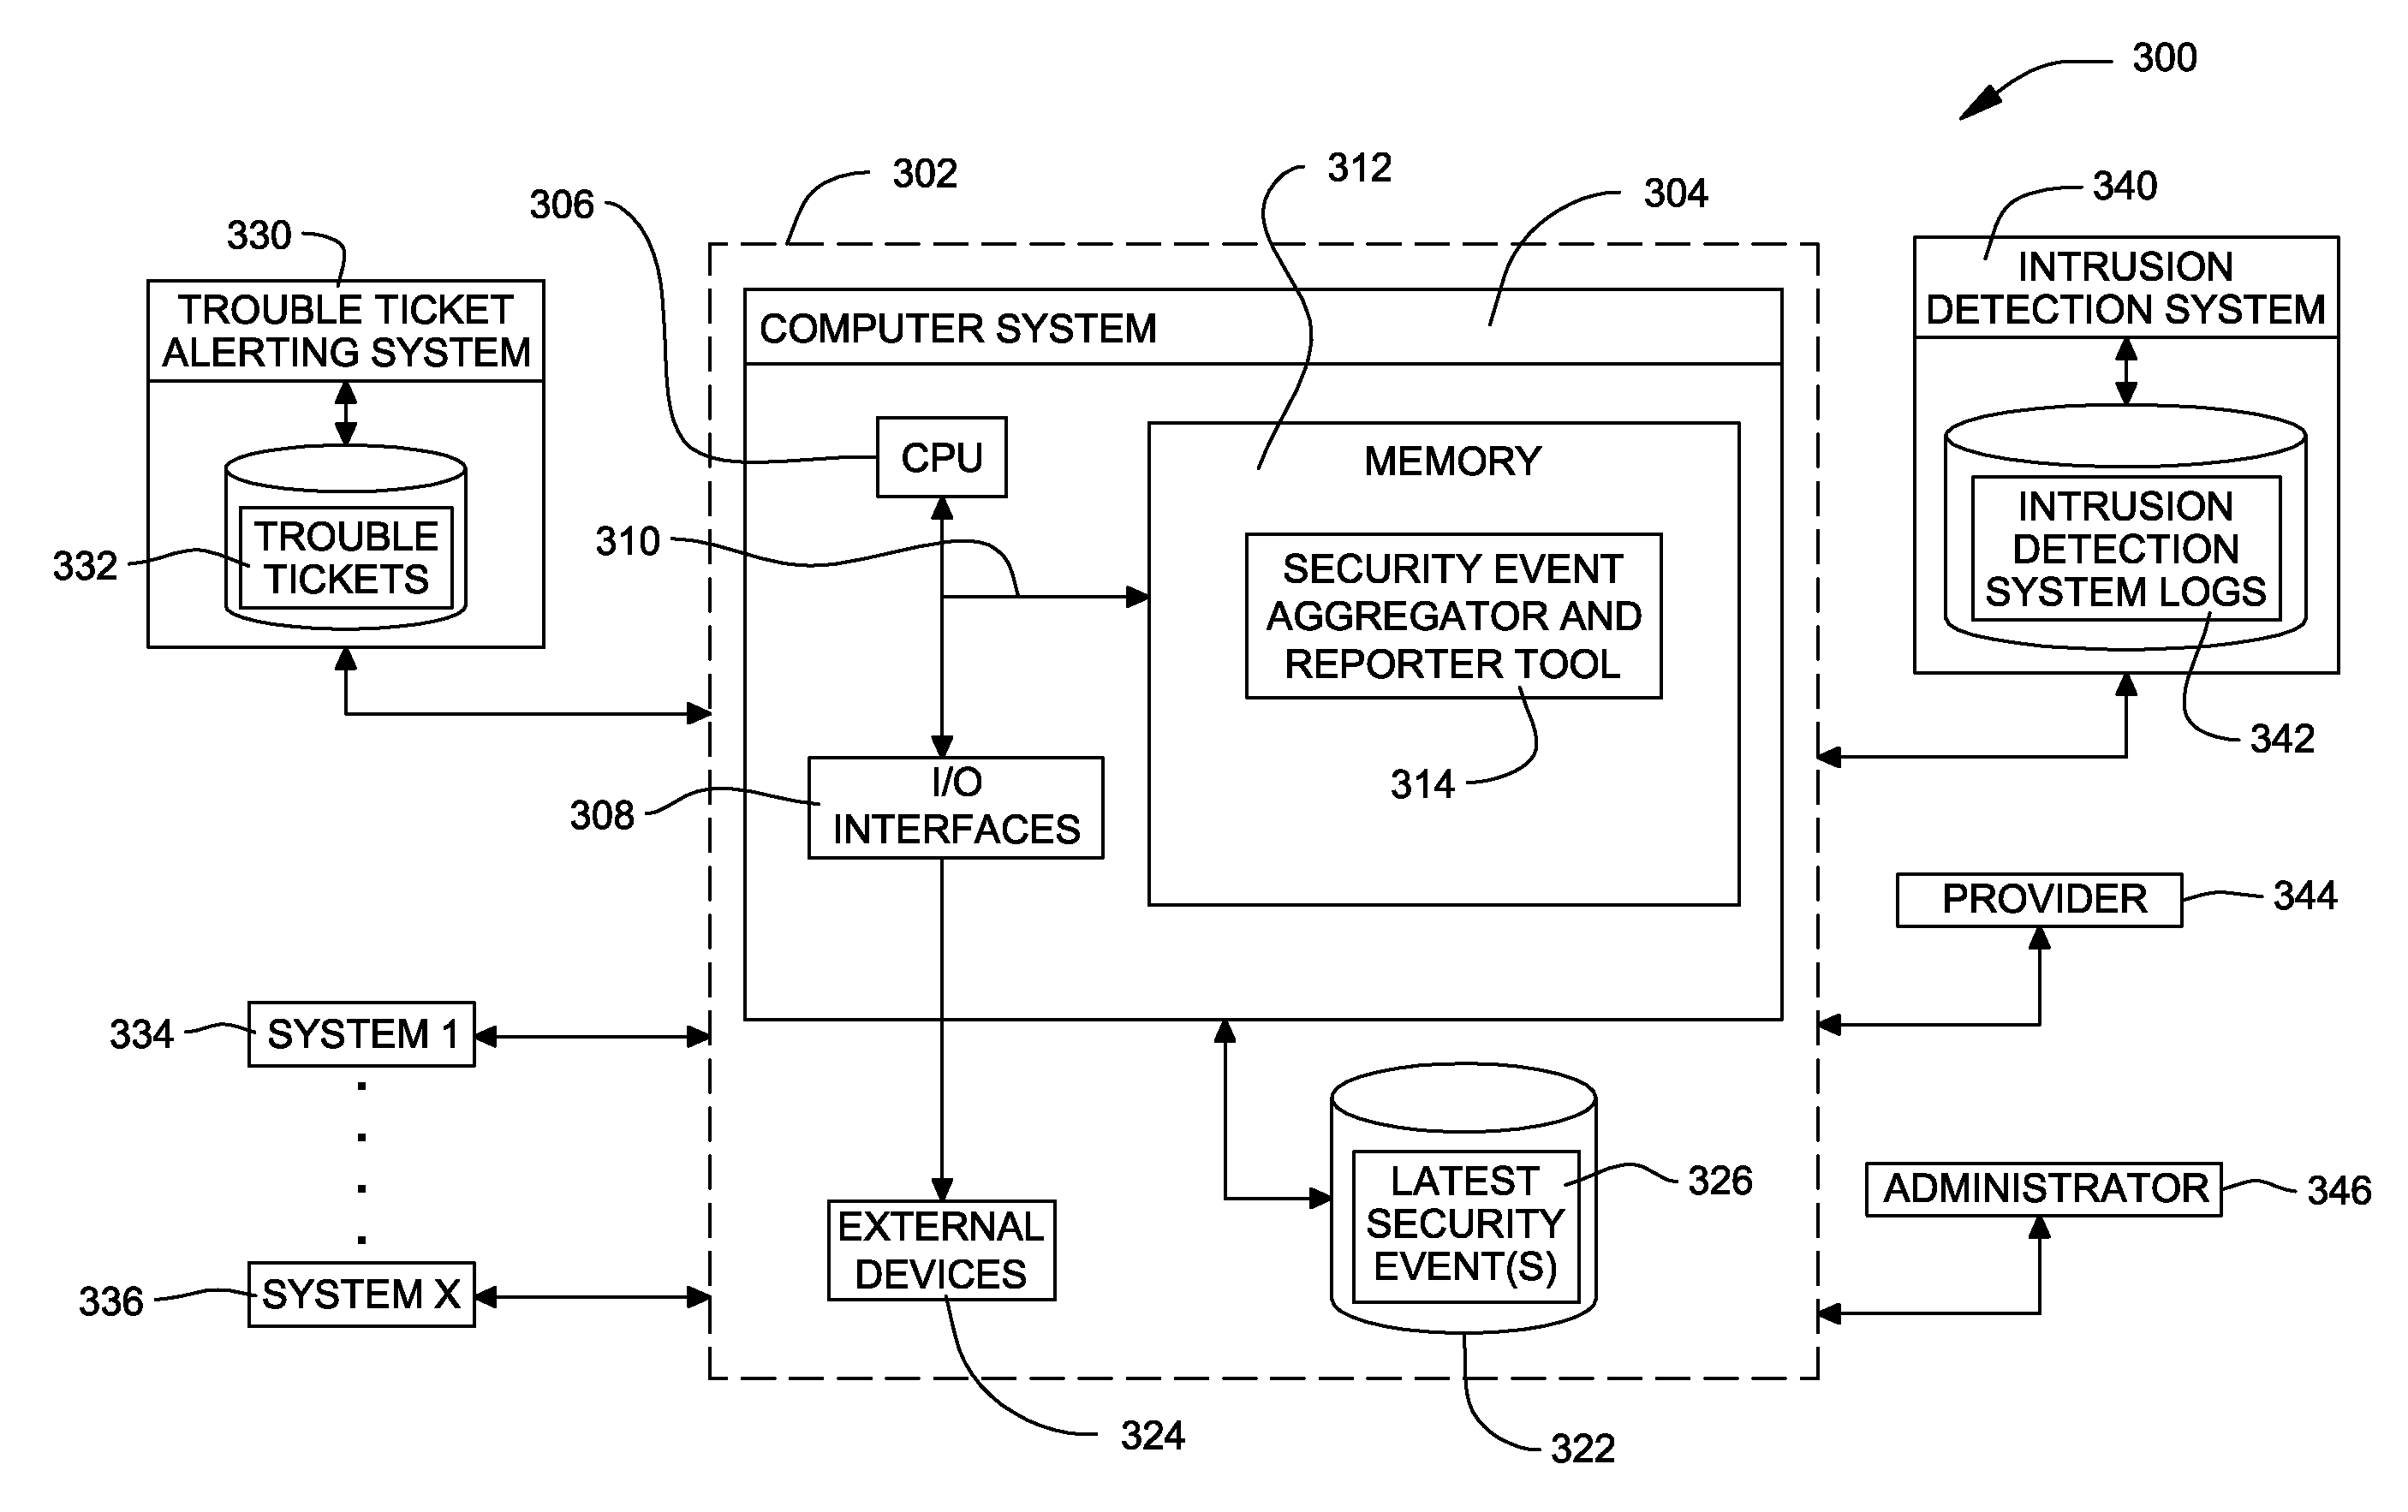 Method, system and program product for alerting an information technology support organization of a security event